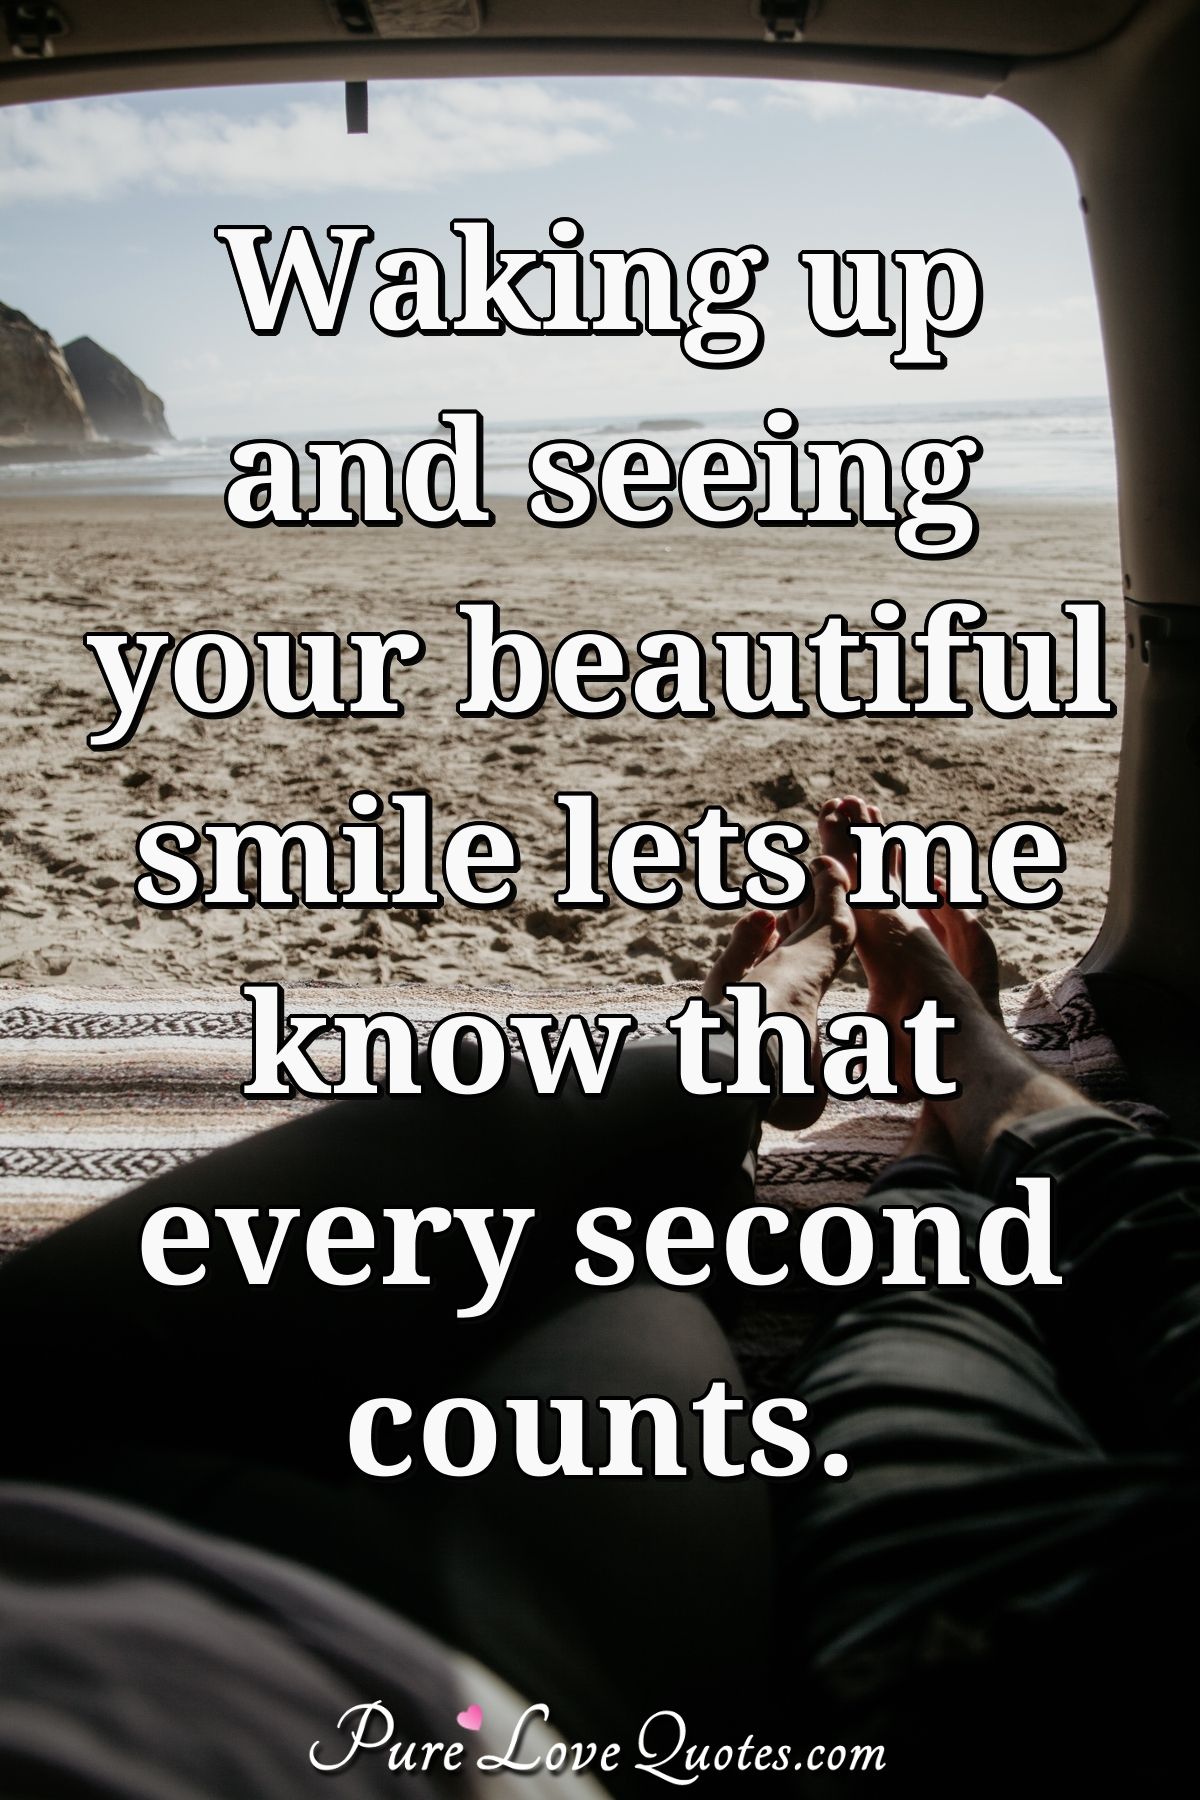 Waking Up And Seeing Your Beautiful Smile Lets Me Know That Every Second Counts. | Purelovequotes